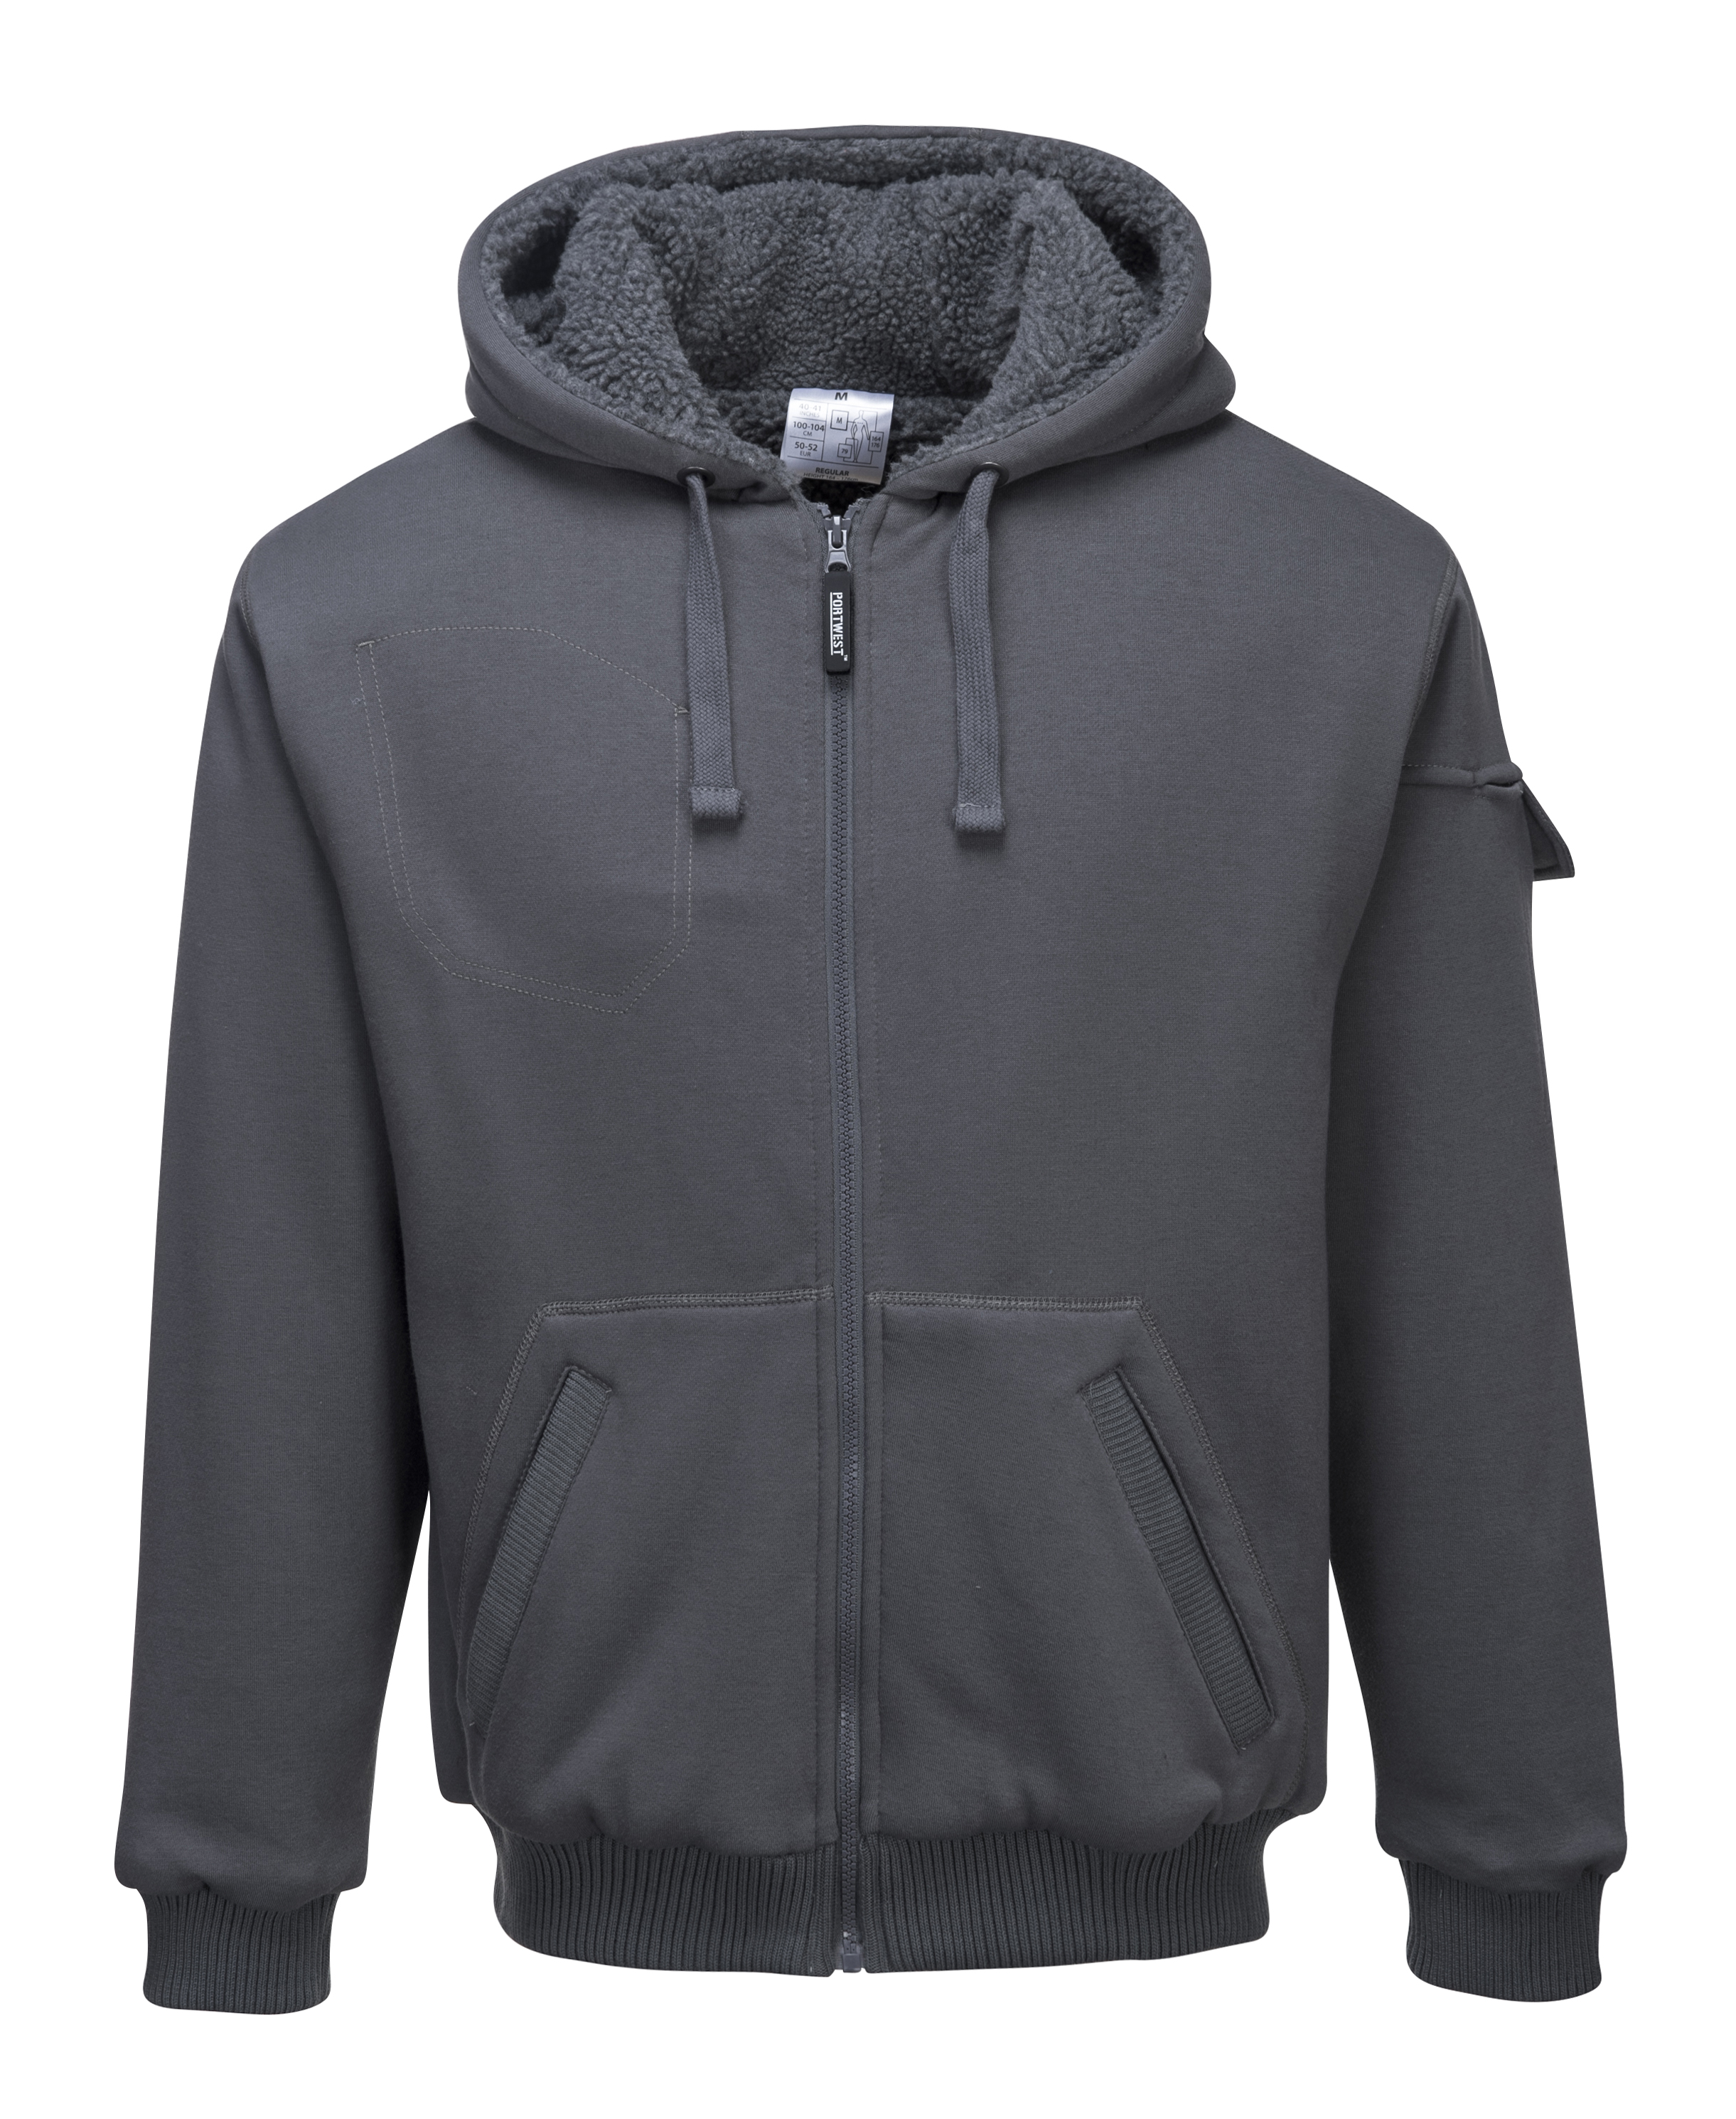 ax-httpss3.eu-west-2.amazonaws.comwebsystemstmp_for_downloadportwest-pewter-jacket-zoom-grey.jpg